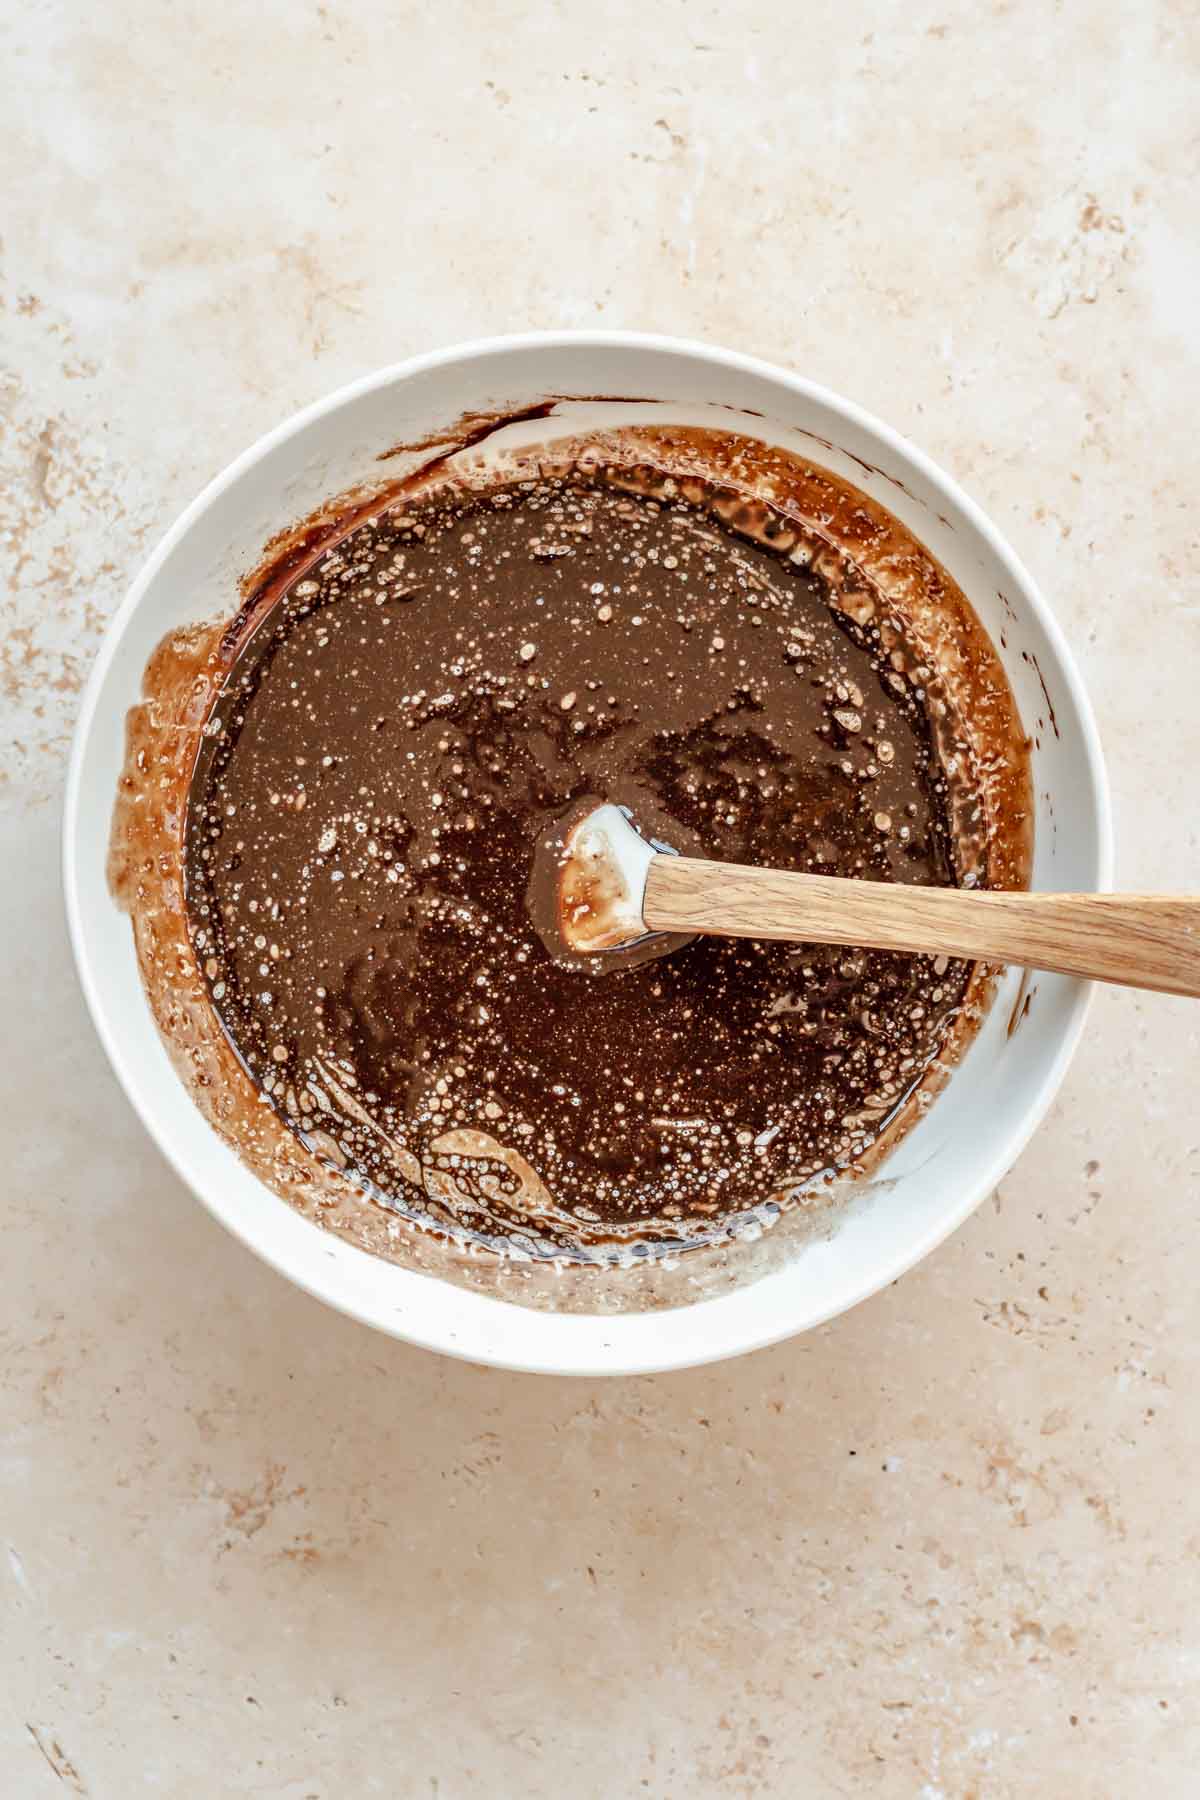 Chocolate and butter melted in a bowl.